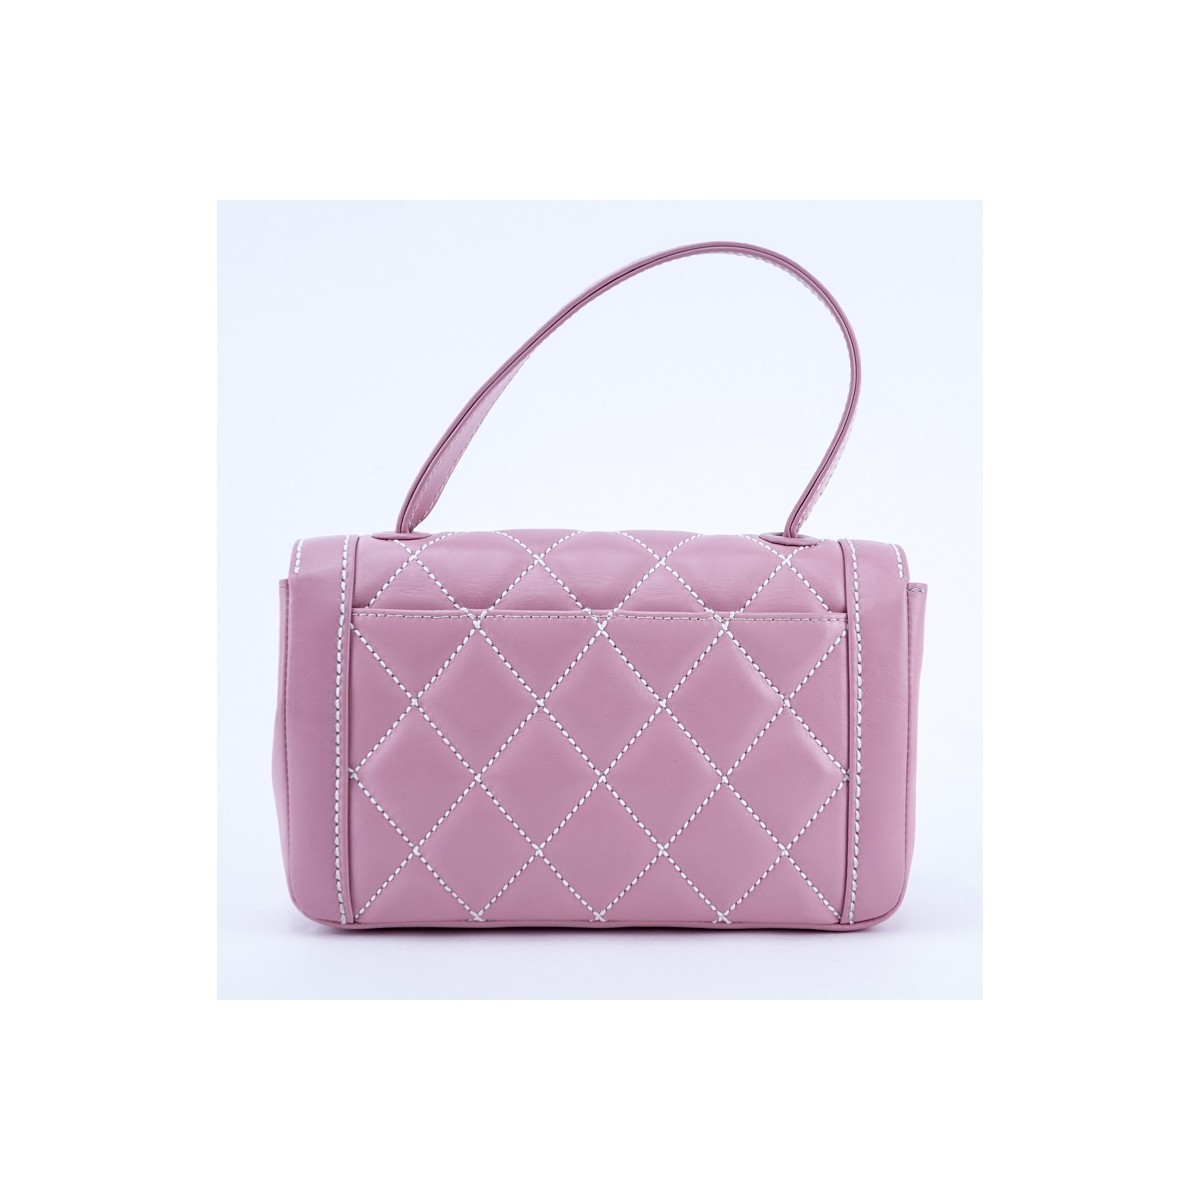 Chanel Light Pink Thick Quilted Leather Top Handle Rectangular Bag. Gold tone hardware, the interior of white monogram fabric with zippered and patch pockets.